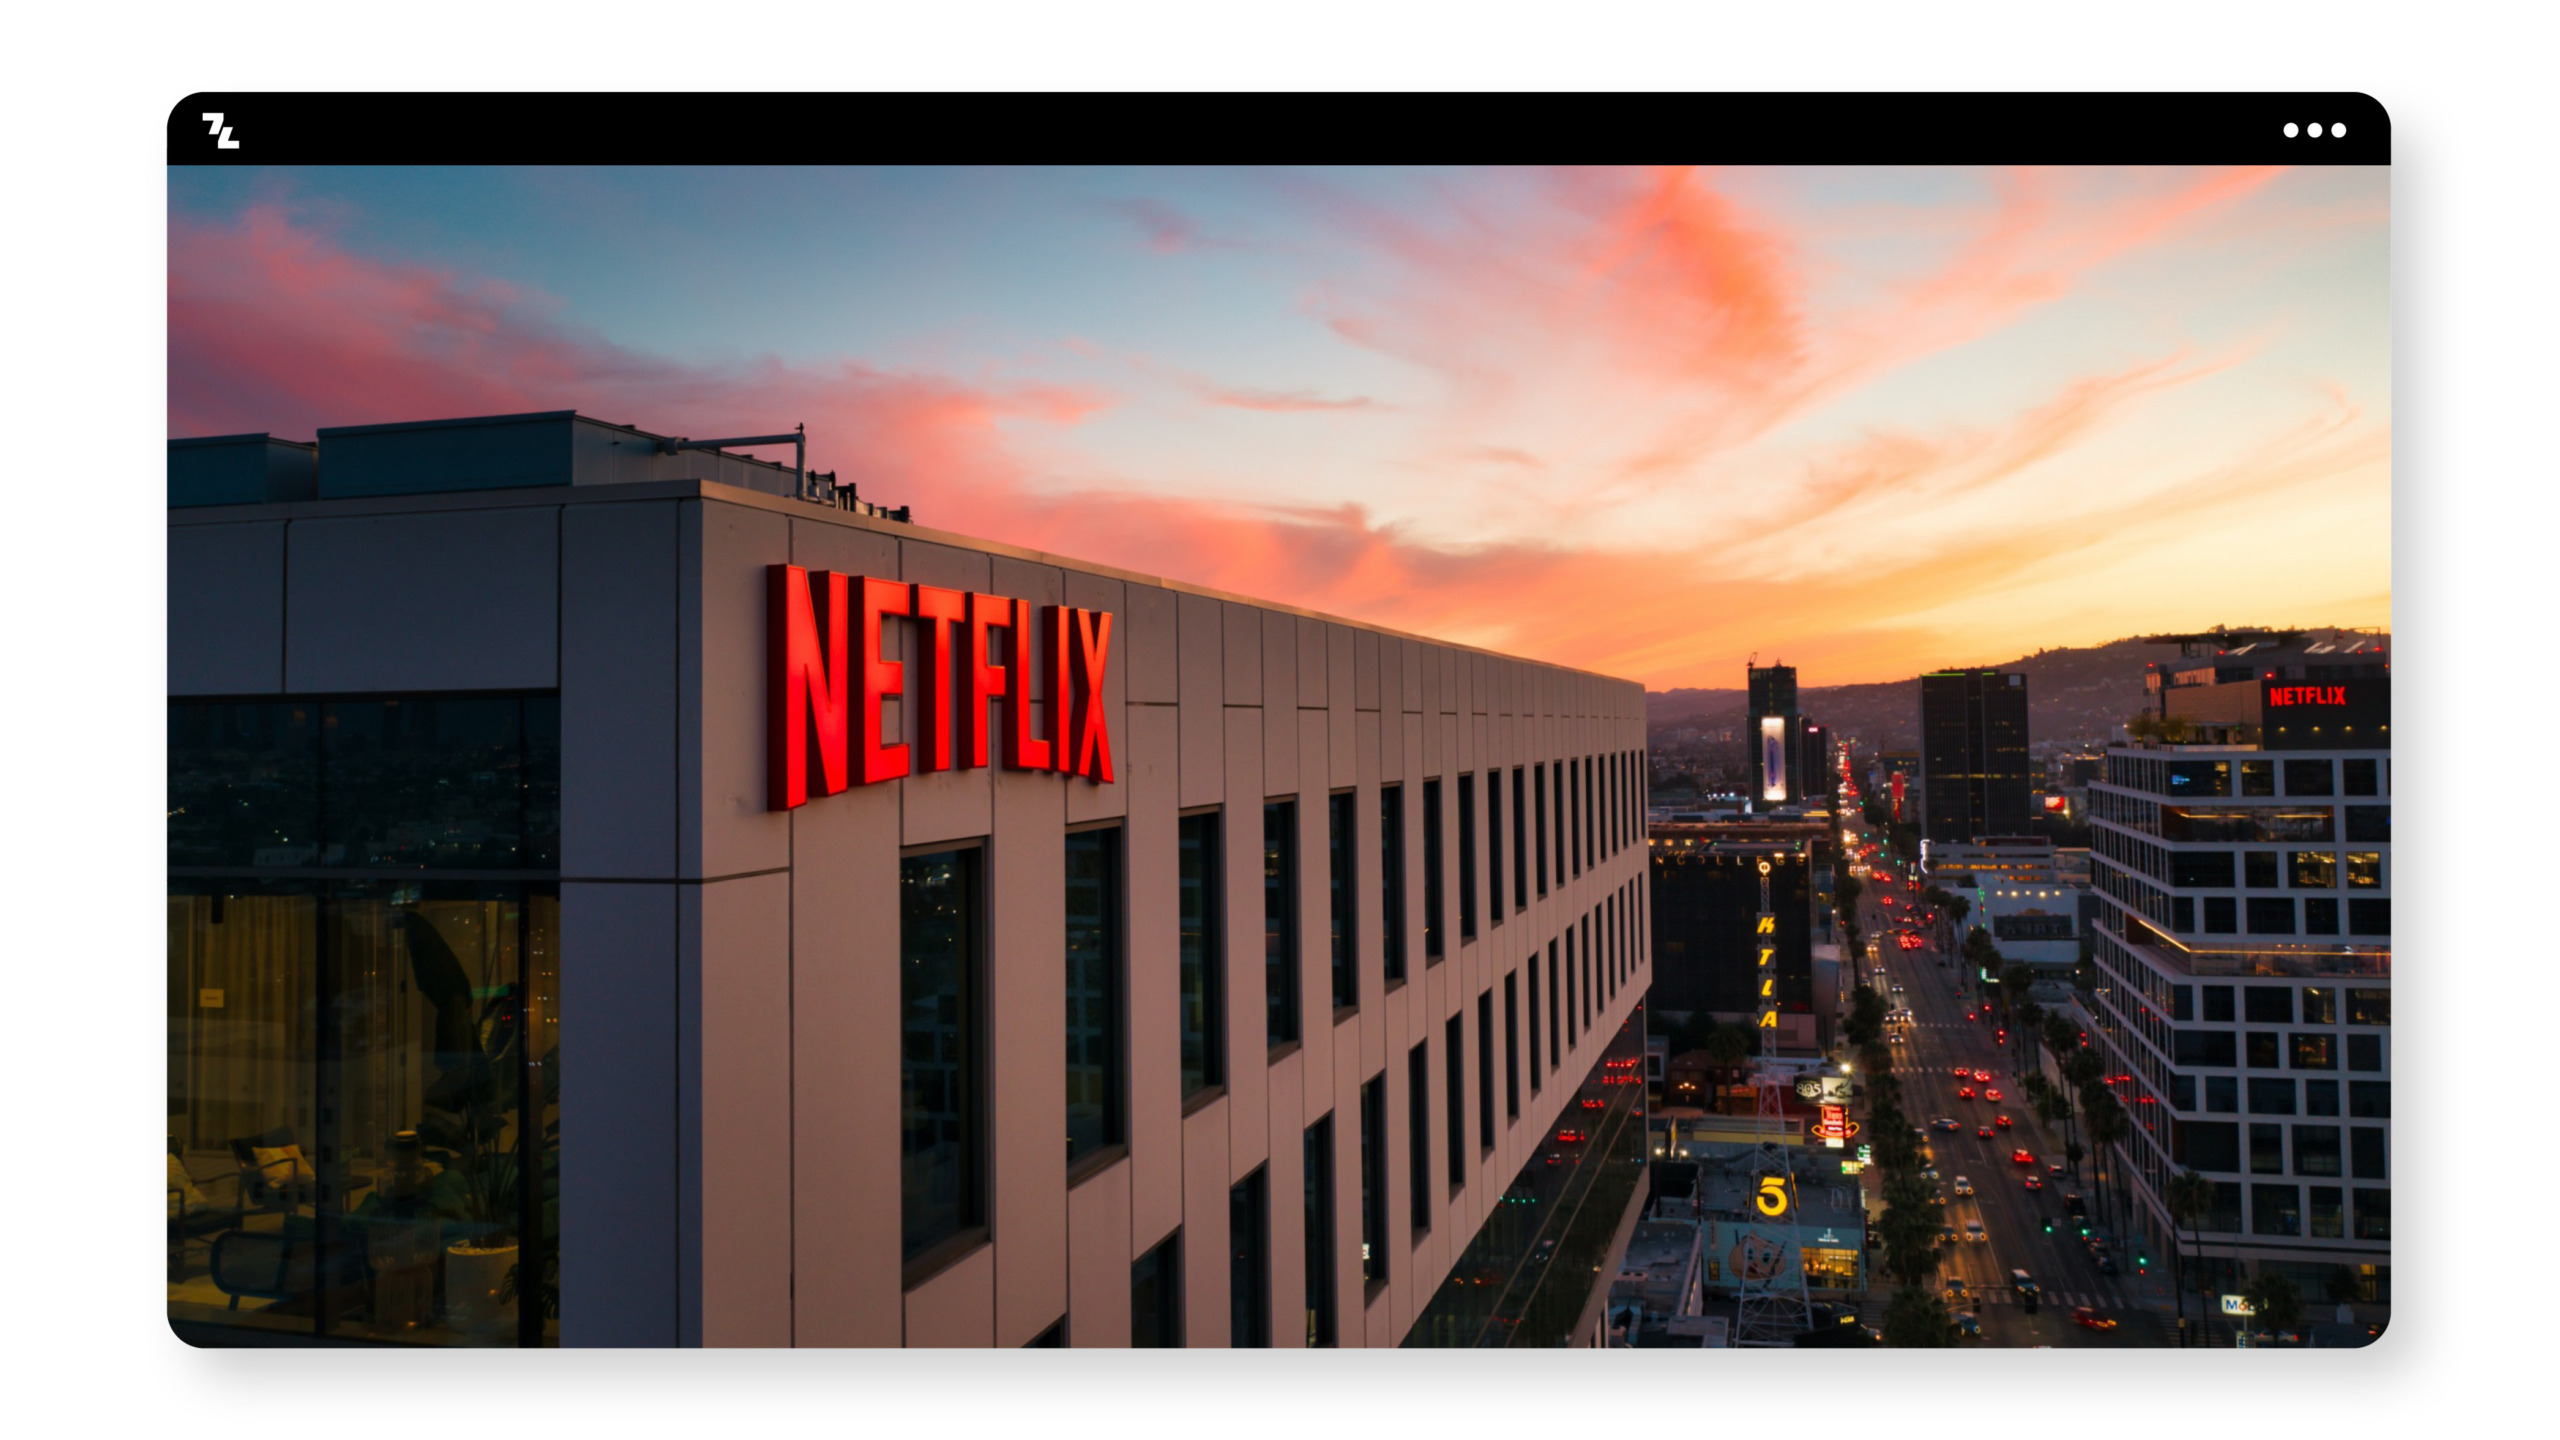 A screenshot of the Netflix logo on a website for brand protection purposes.